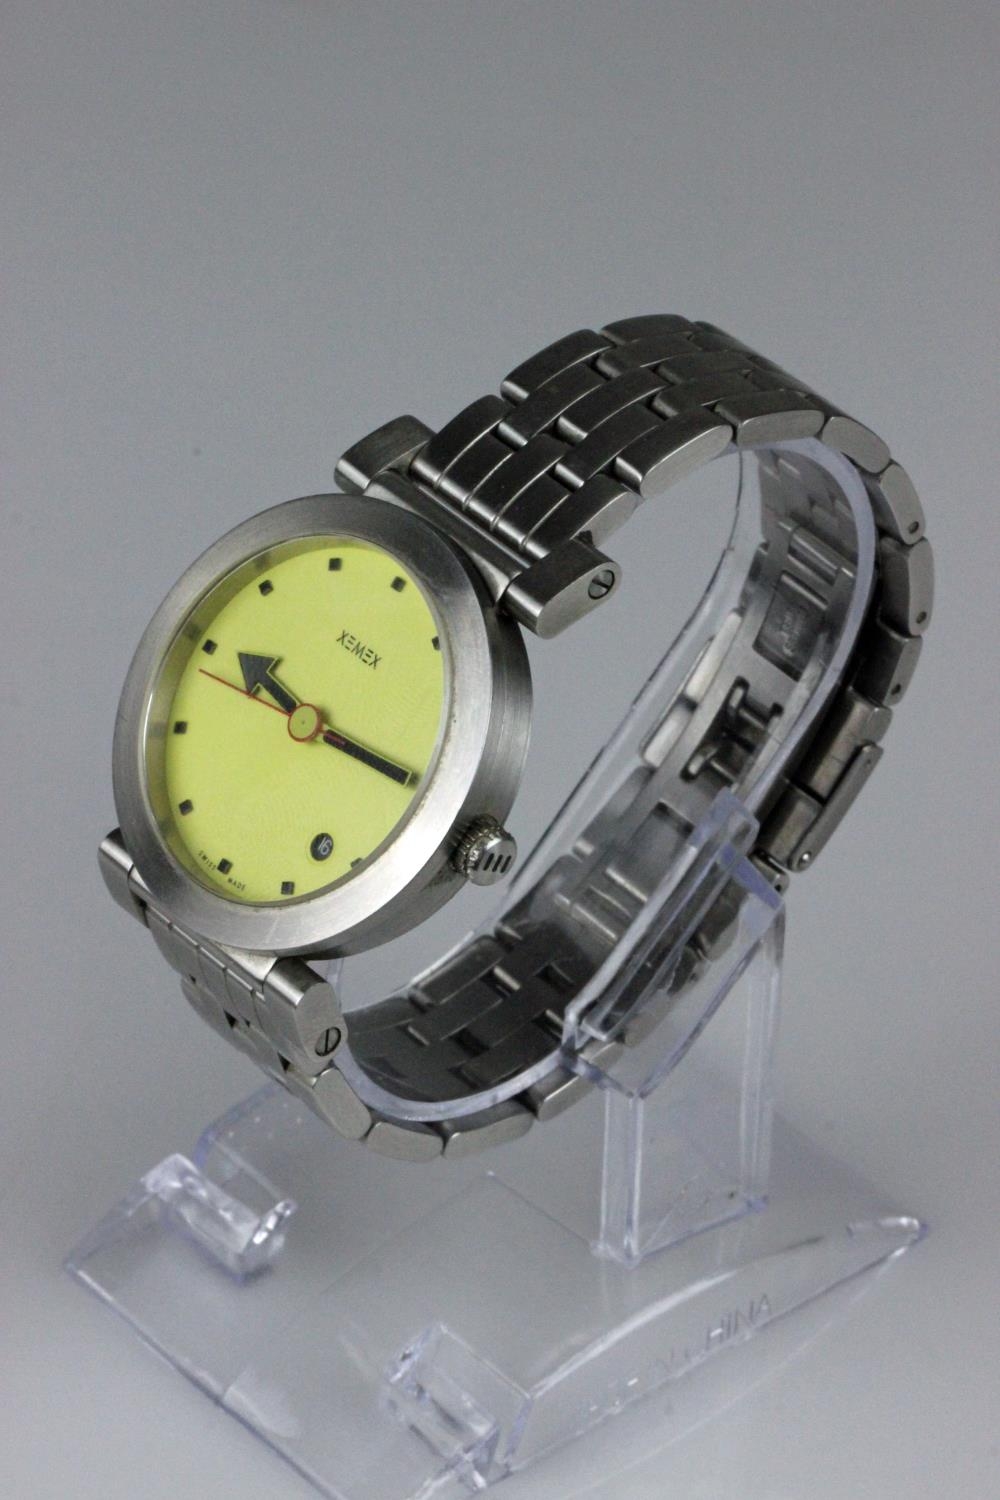 Xemex Offroad Swiss Made Stainless Quartz Watch. Swiss Made XEMEX Offroad with Swiss 3 Jewel - Image 2 of 5